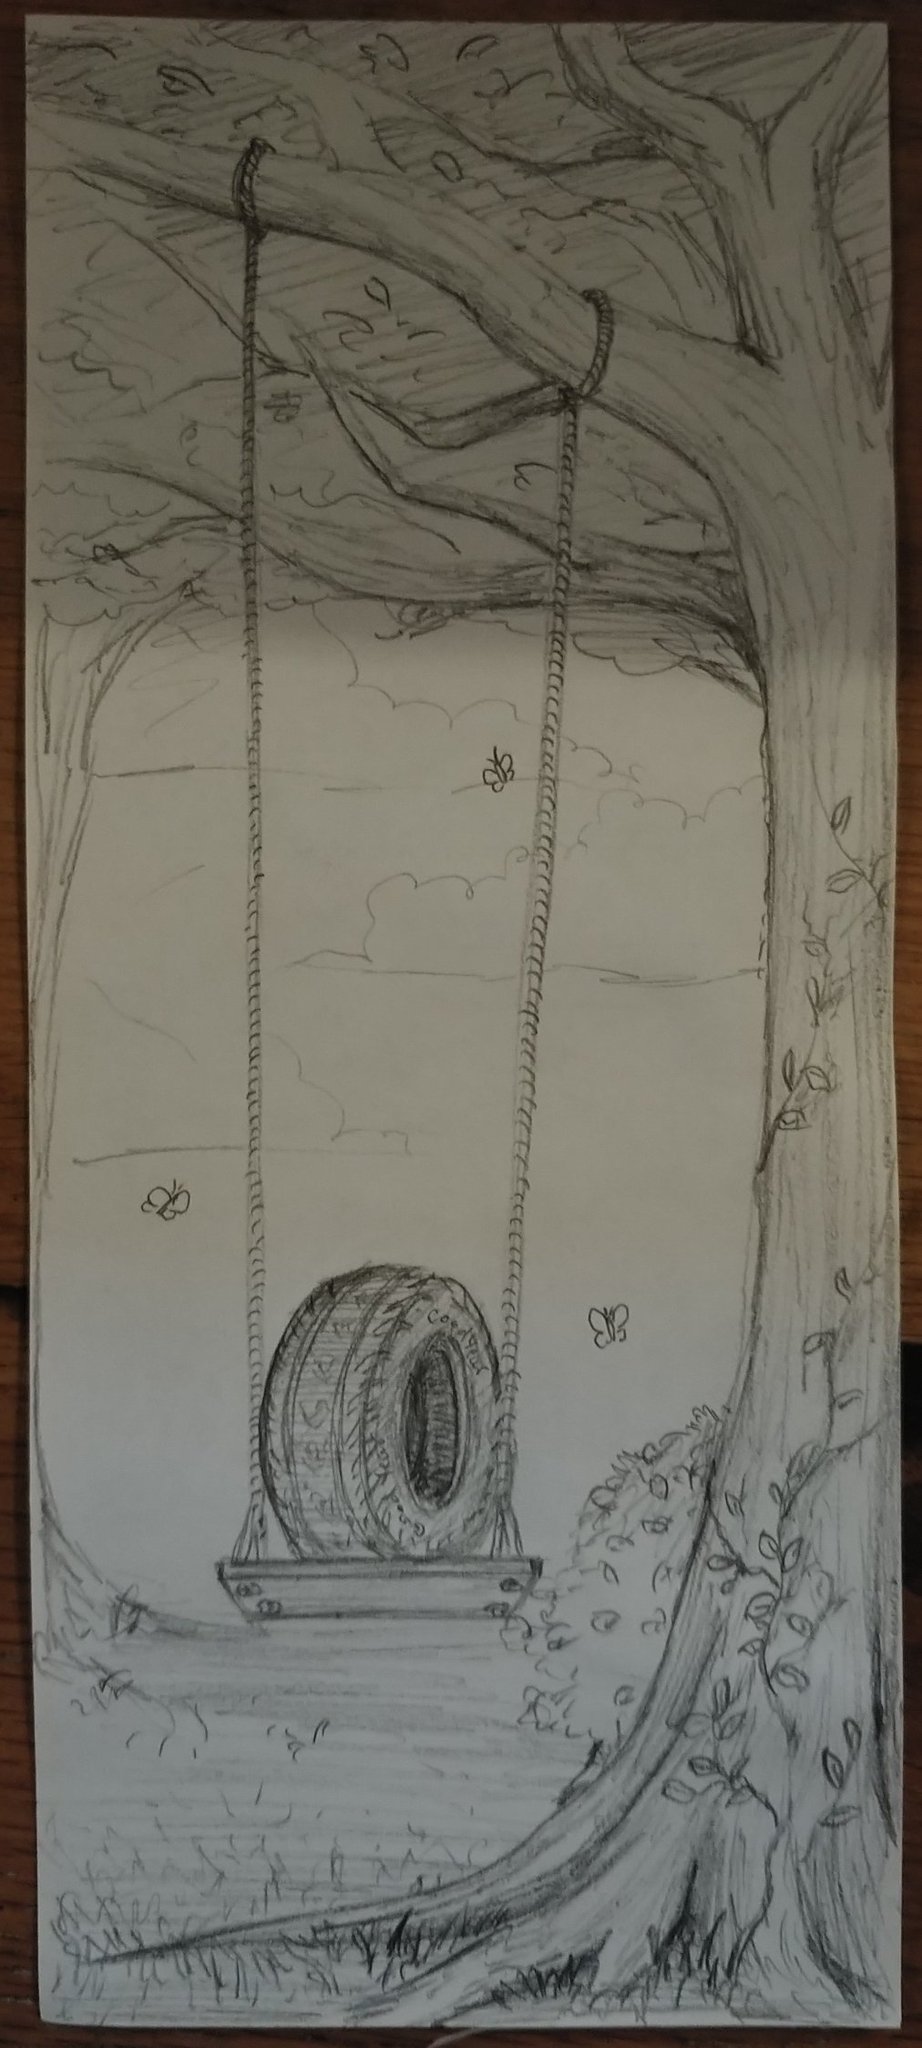 Somebody at work asked me to draw a "tire swing" - meme